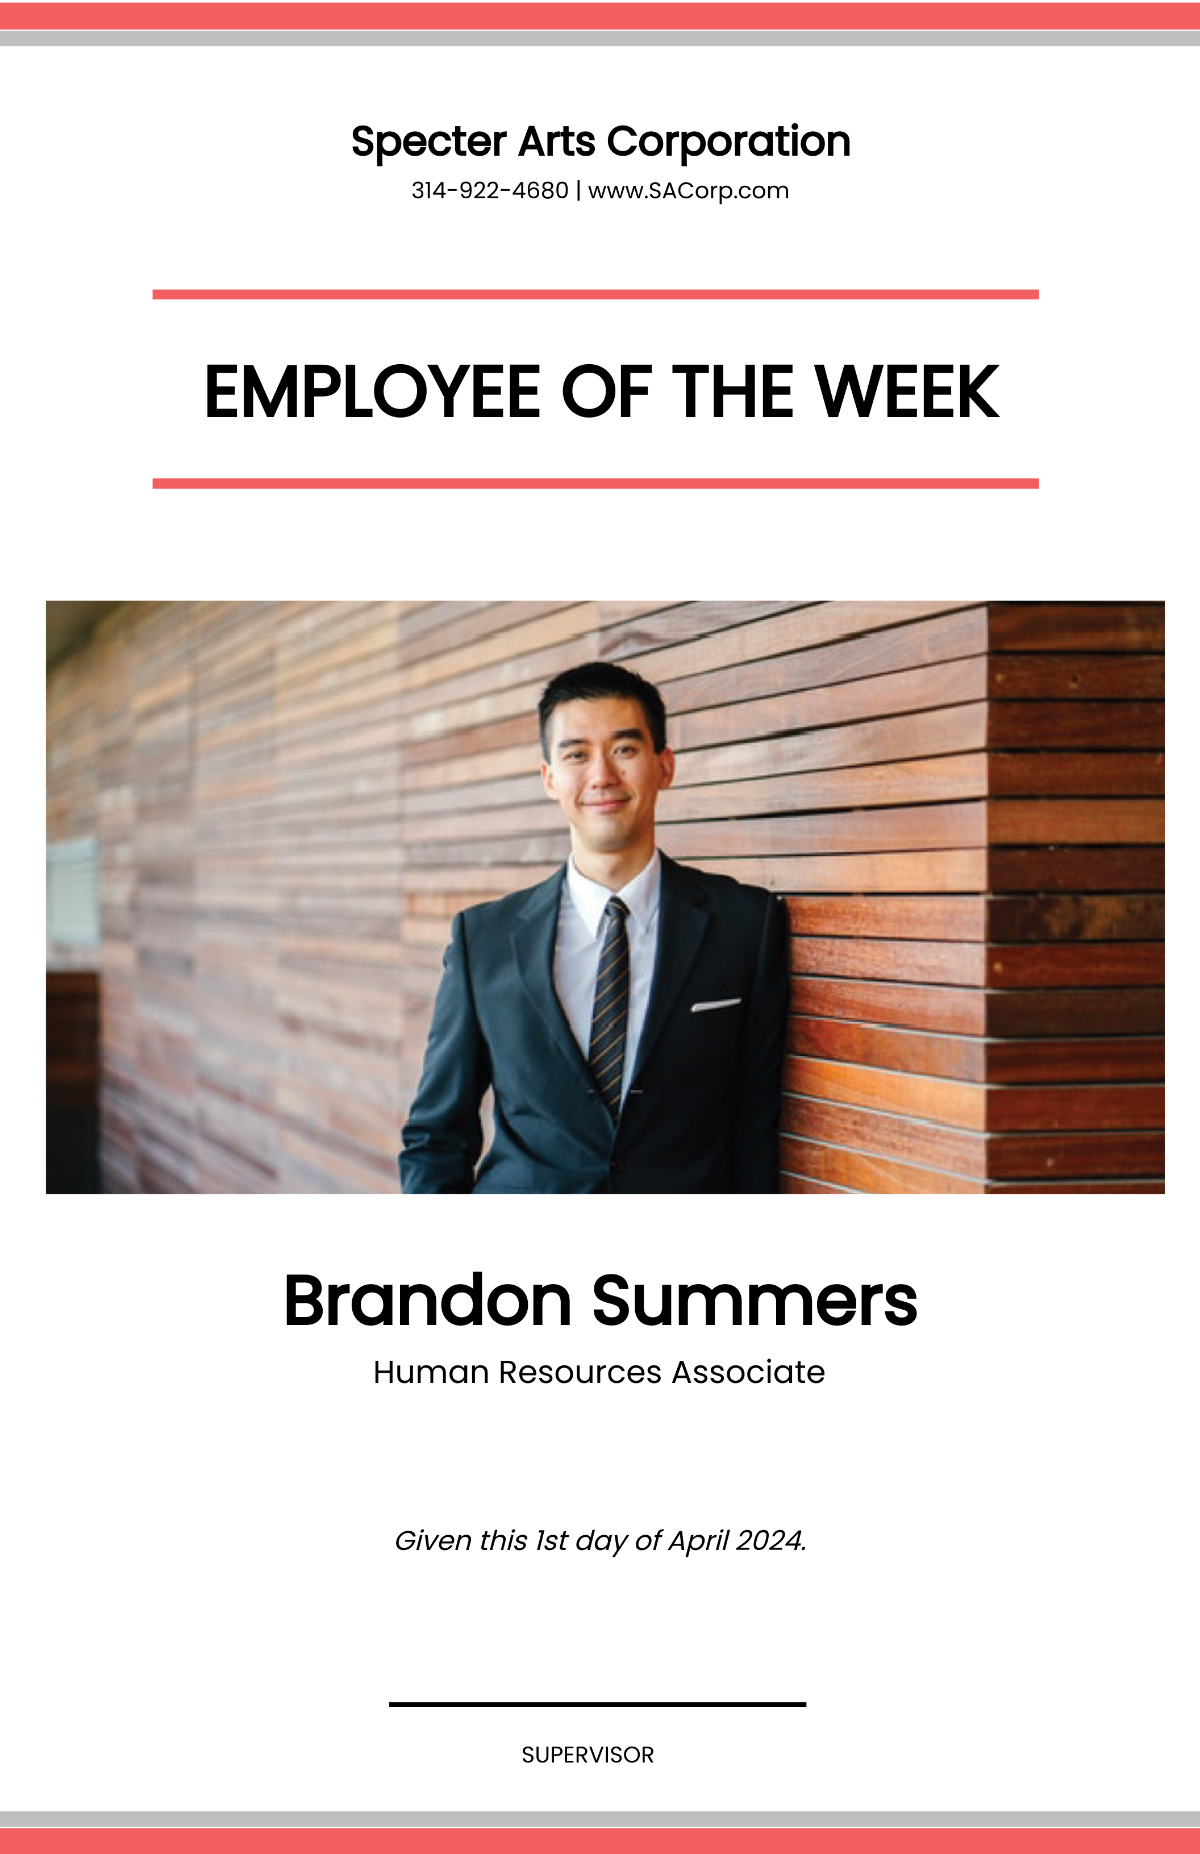 Best Employee of the Week Poster Template